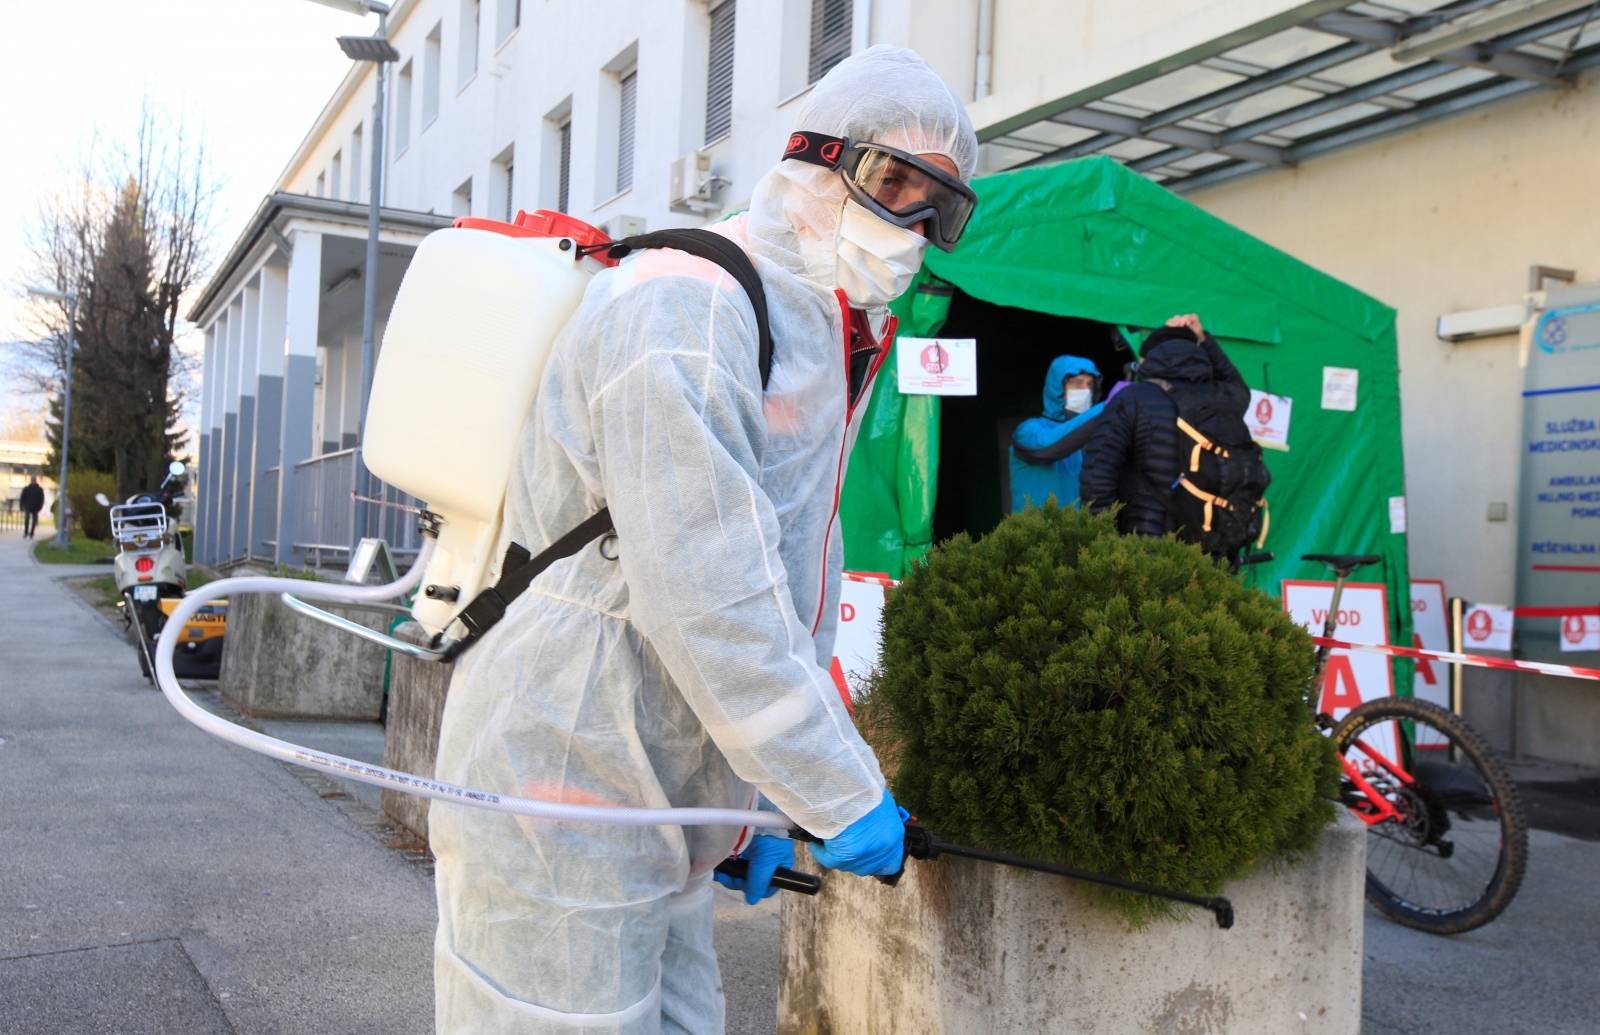 A worker sprays disinfectant to prevent the spread of coronavirus disease (COVID-19), outside the hospital in Kranj